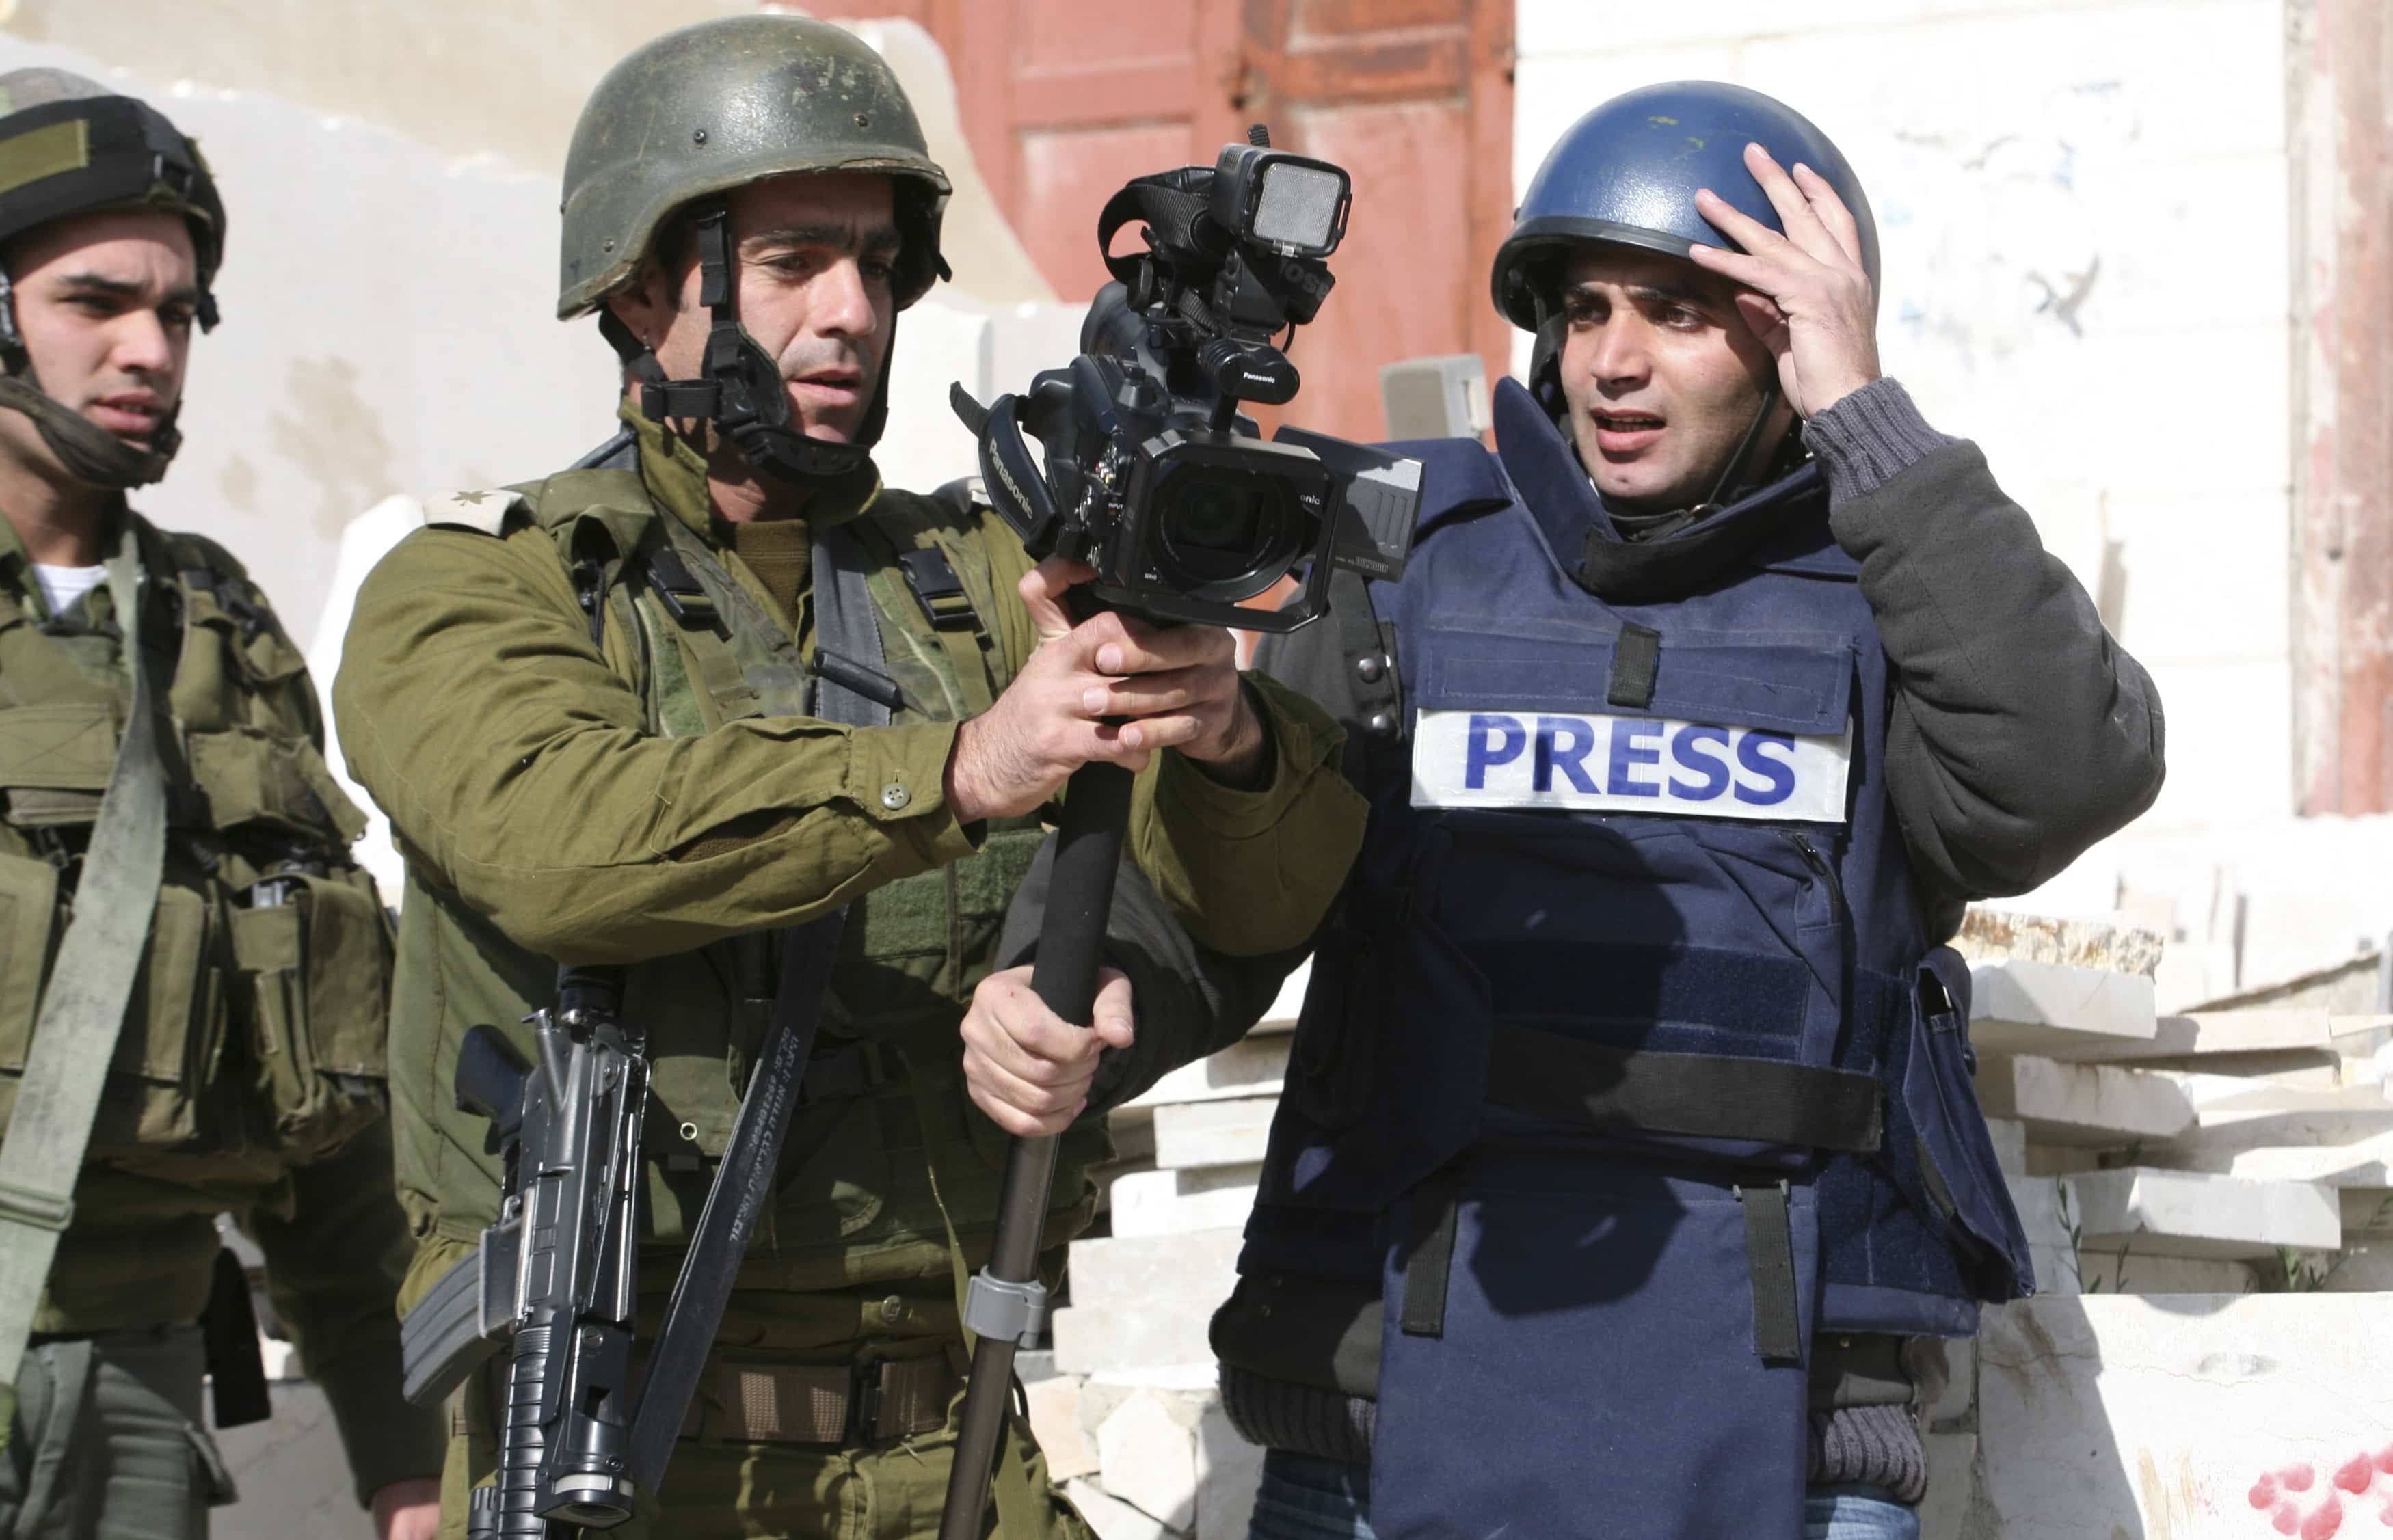 The UN Action Plan aims to improve practical safety supports for journalists at risk, REUTERS